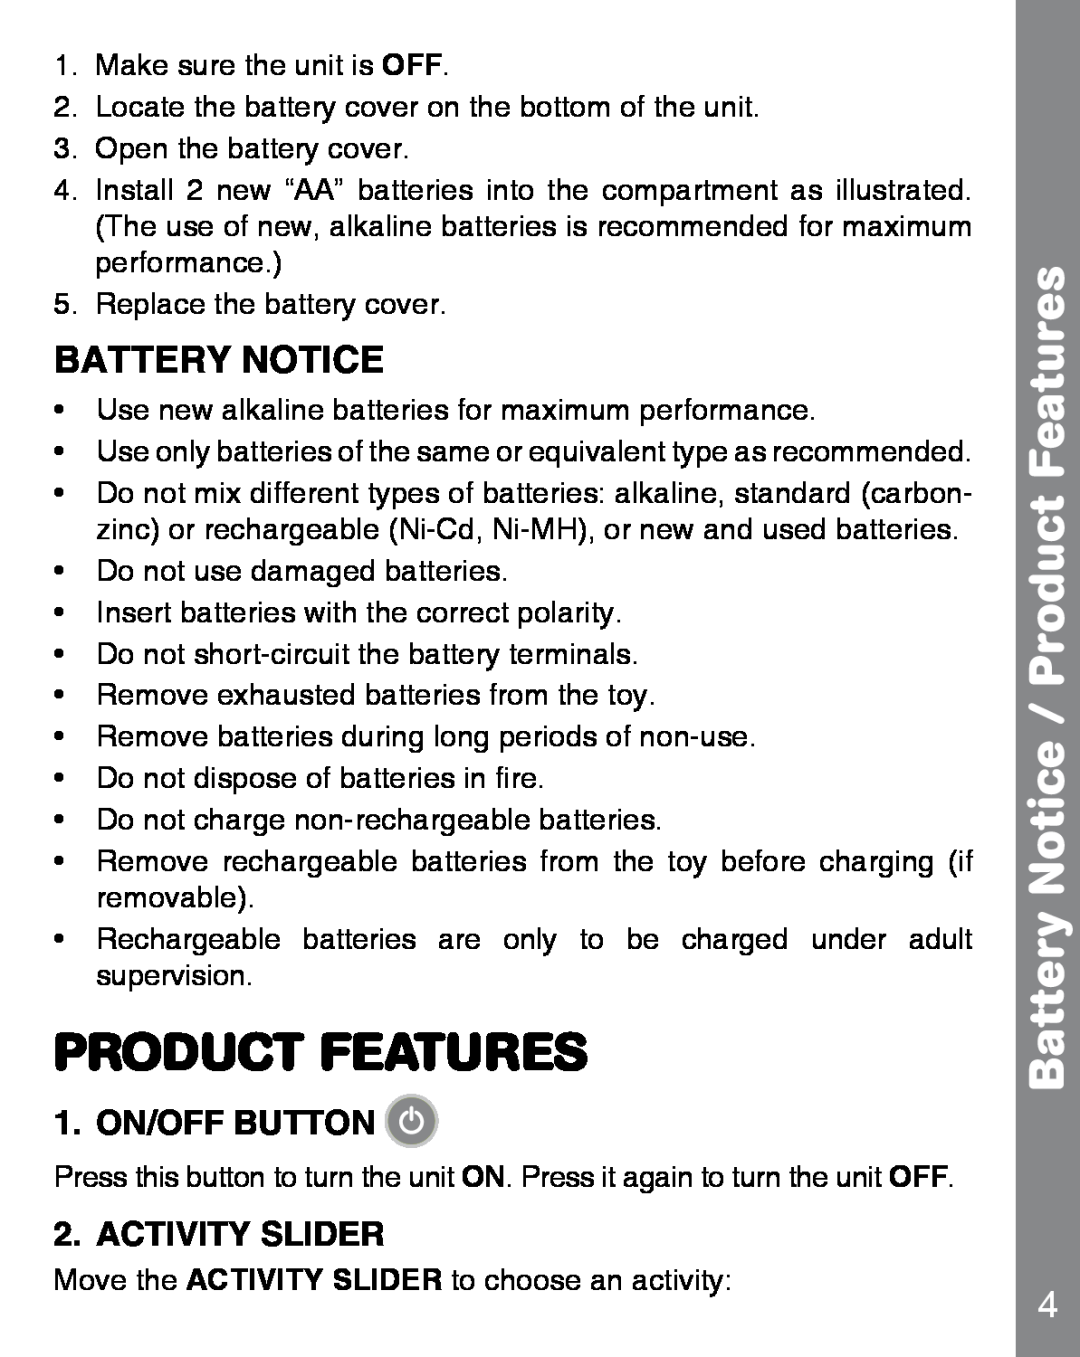 VTech 91-002815-008 user manual Battery Notice / Product Features, 1. ON/OFF BUTTON, Activity Slider 